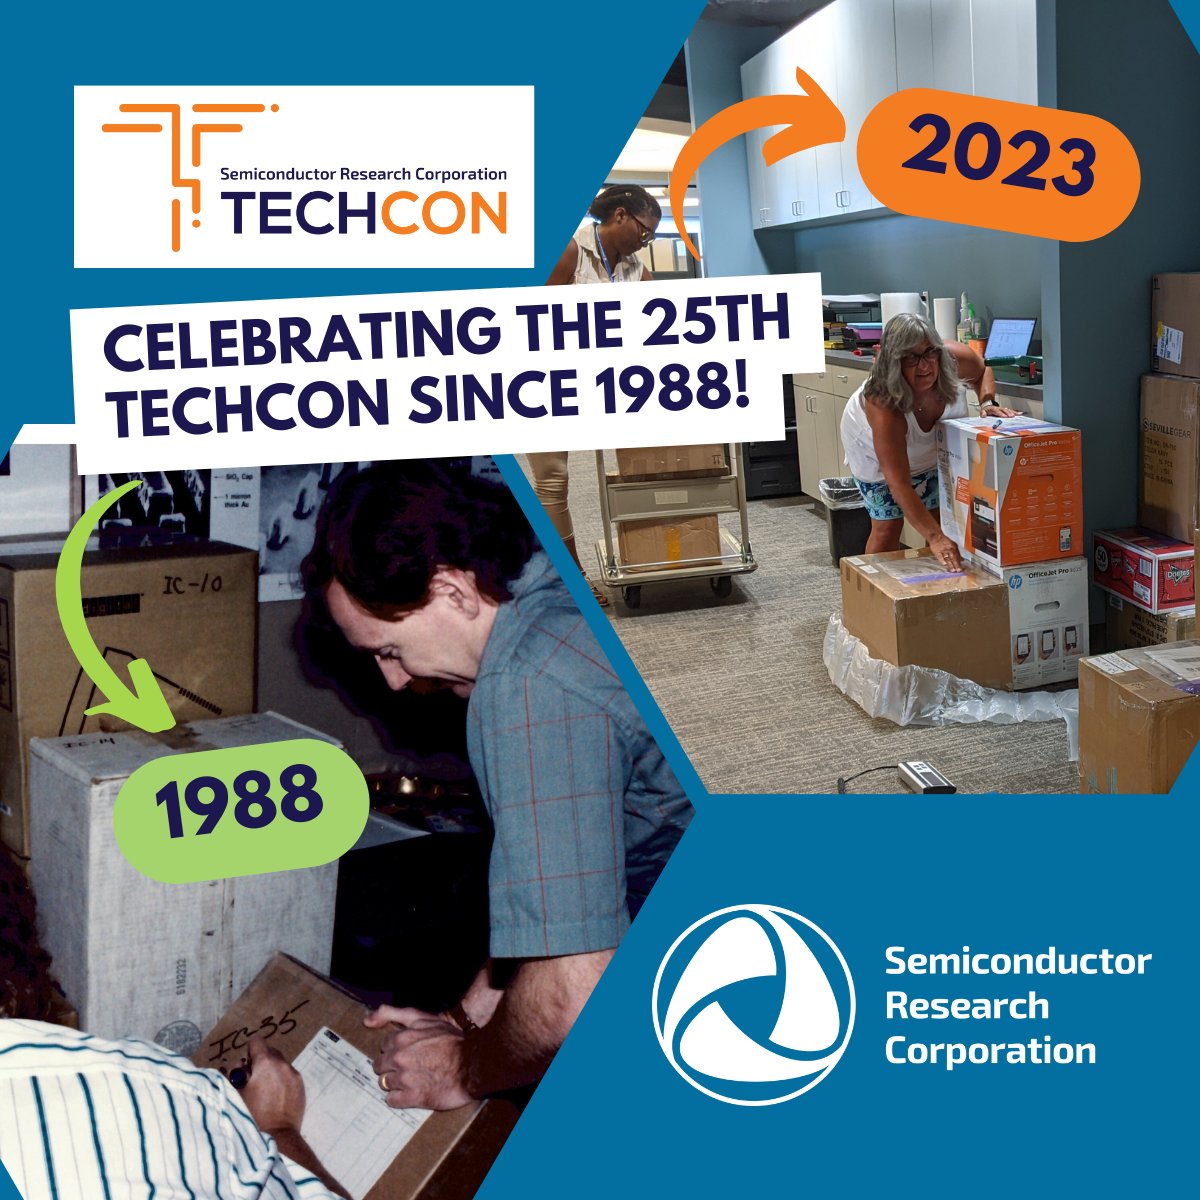 Some things never change! It's the 25th TECHCON since 1988, and Jacqui Hall & Lisa Green are packing boxes to send to #TECHCON2023 in Austin next week. Michael D. Connelly had the right idea back in 1988. 😎 We are looking forward to seeing y'all there! #connectinginnovators